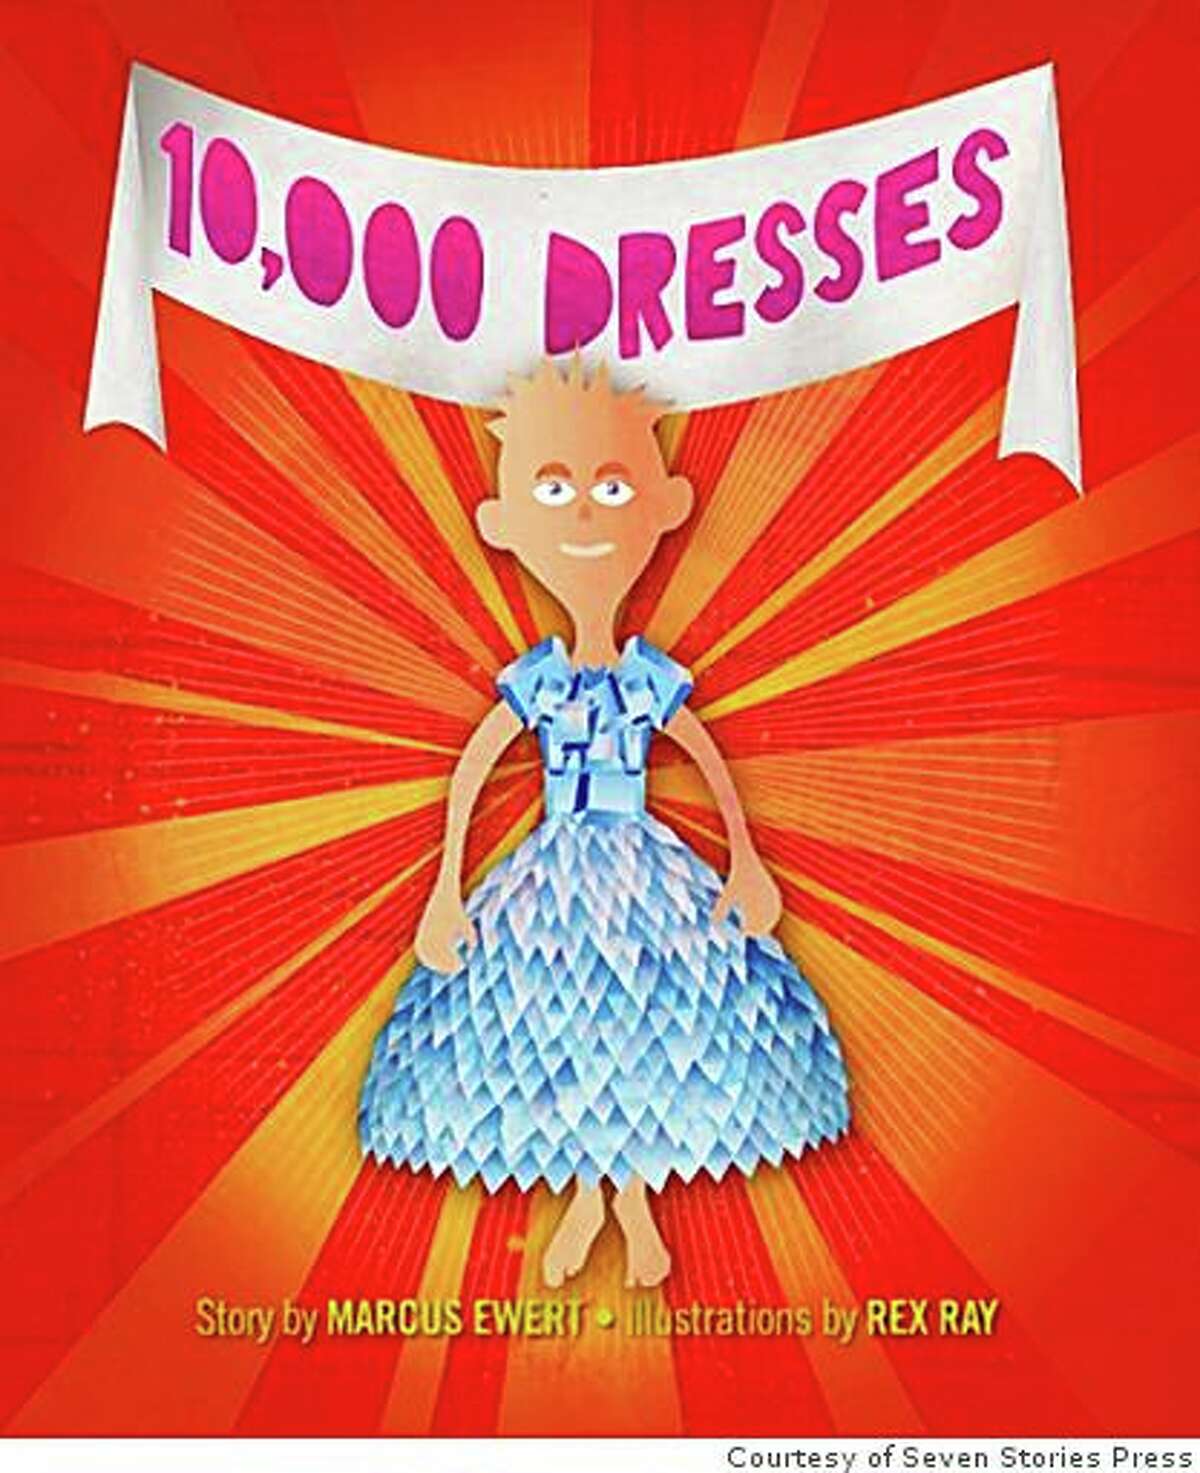 "10,000 Dresses," a book for young readers by Marcus Ewert, with illustrations by Rex Ray.